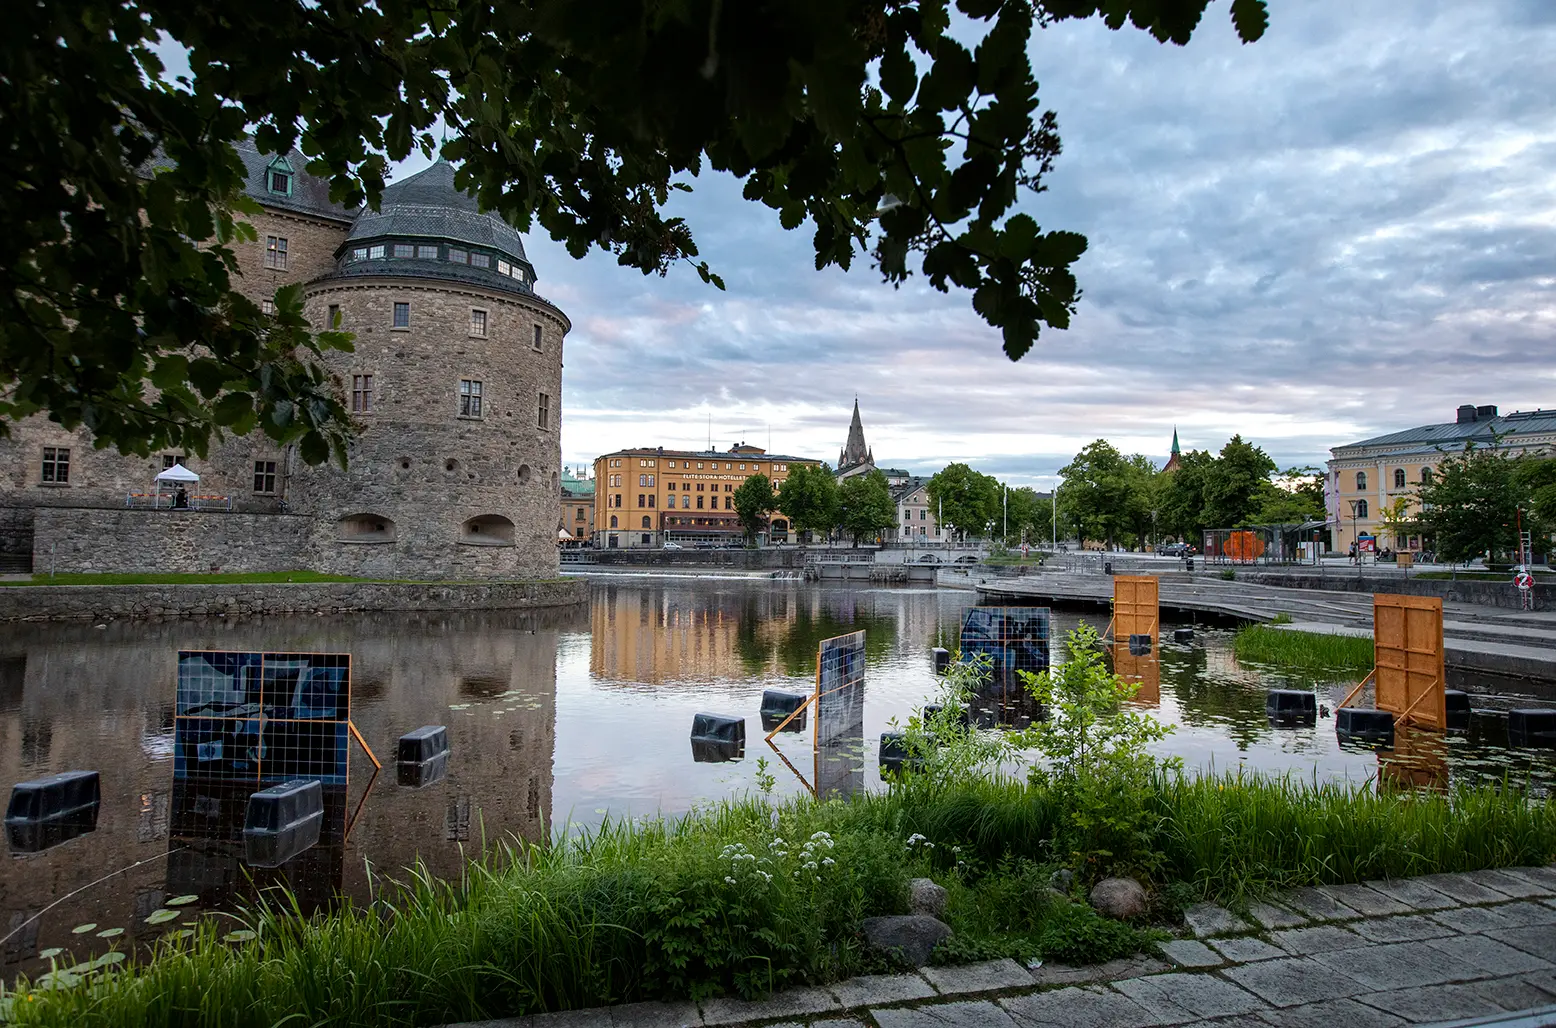 Overview of paintings made of ceramic tiles in shades of blue that are placed in the water around Örebro Castle.